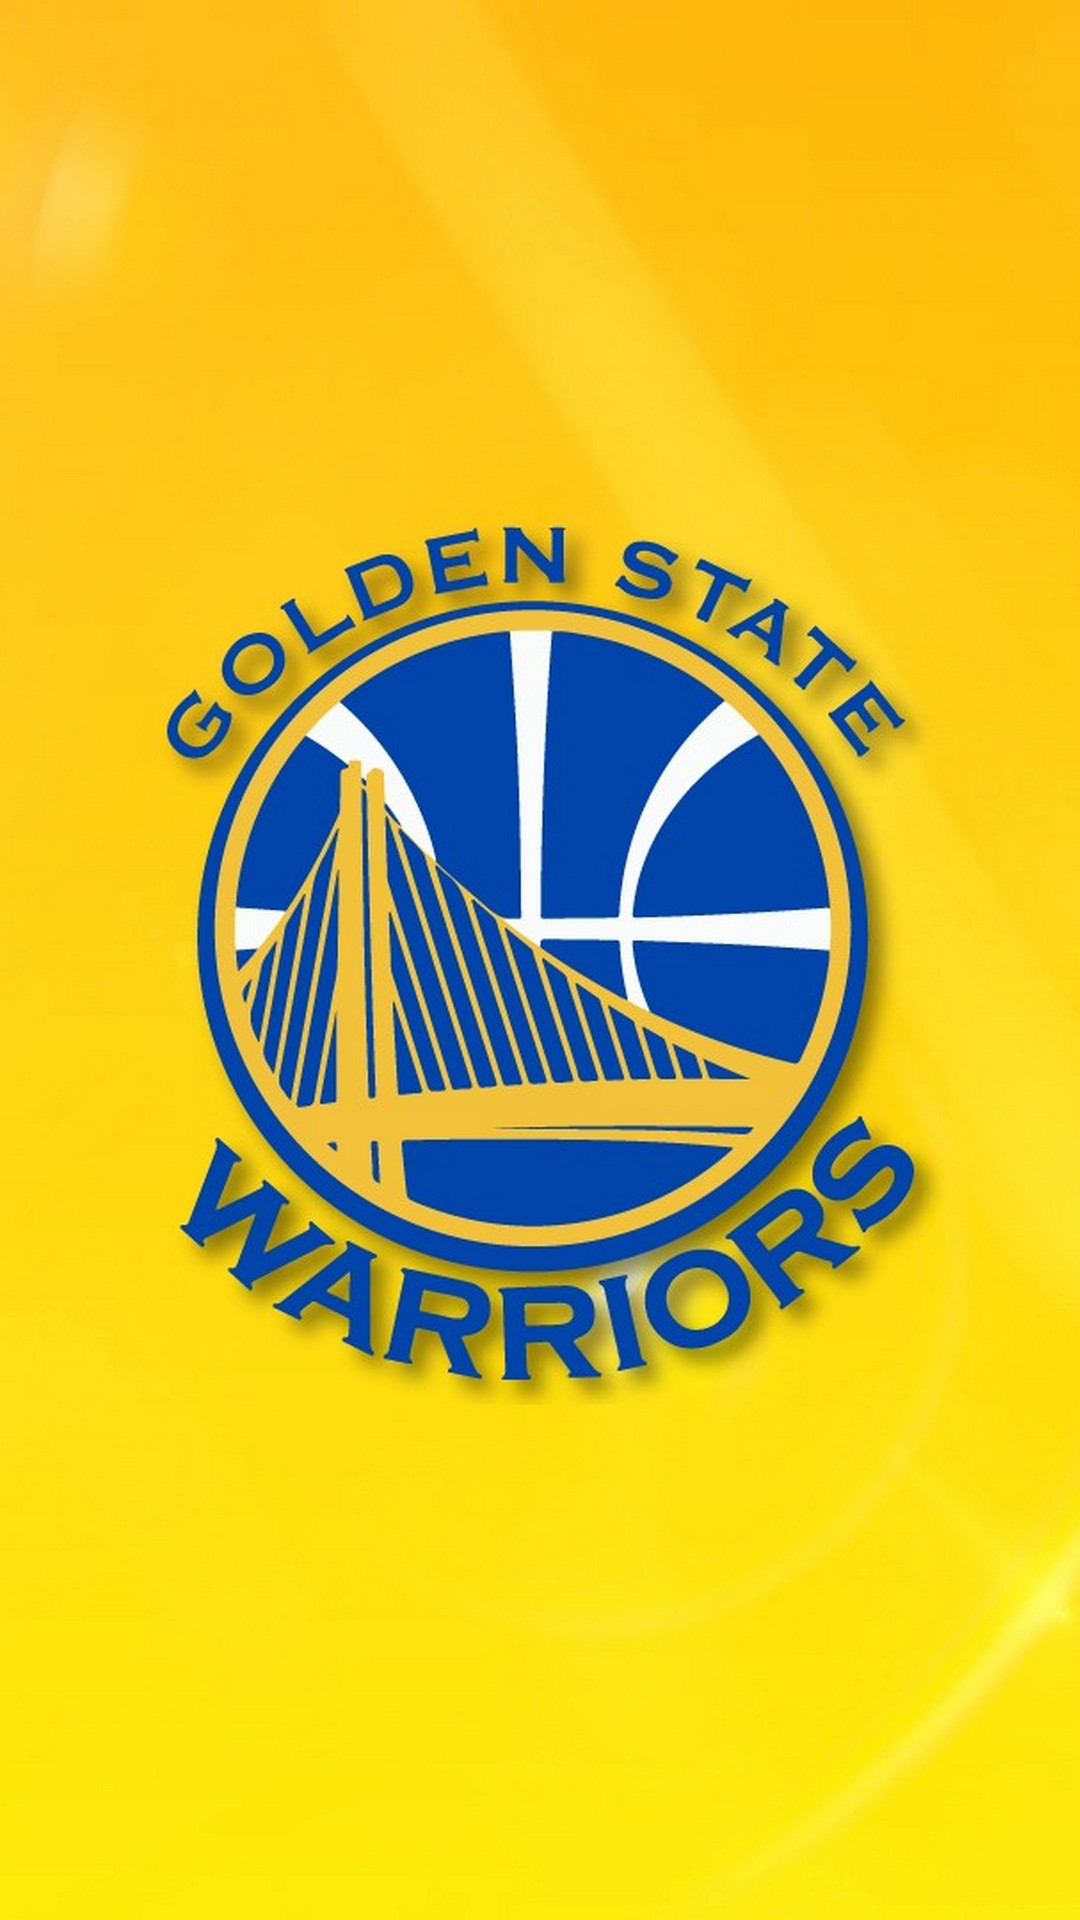 Mobile Wallpaper HD Golden State with image dimensions 1080x1920 pixel. You can make this wallpaper for your Desktop Computer Backgrounds, Windows or Mac Screensavers, iPhone Lock screen, Tablet or Android and another Mobile Phone device